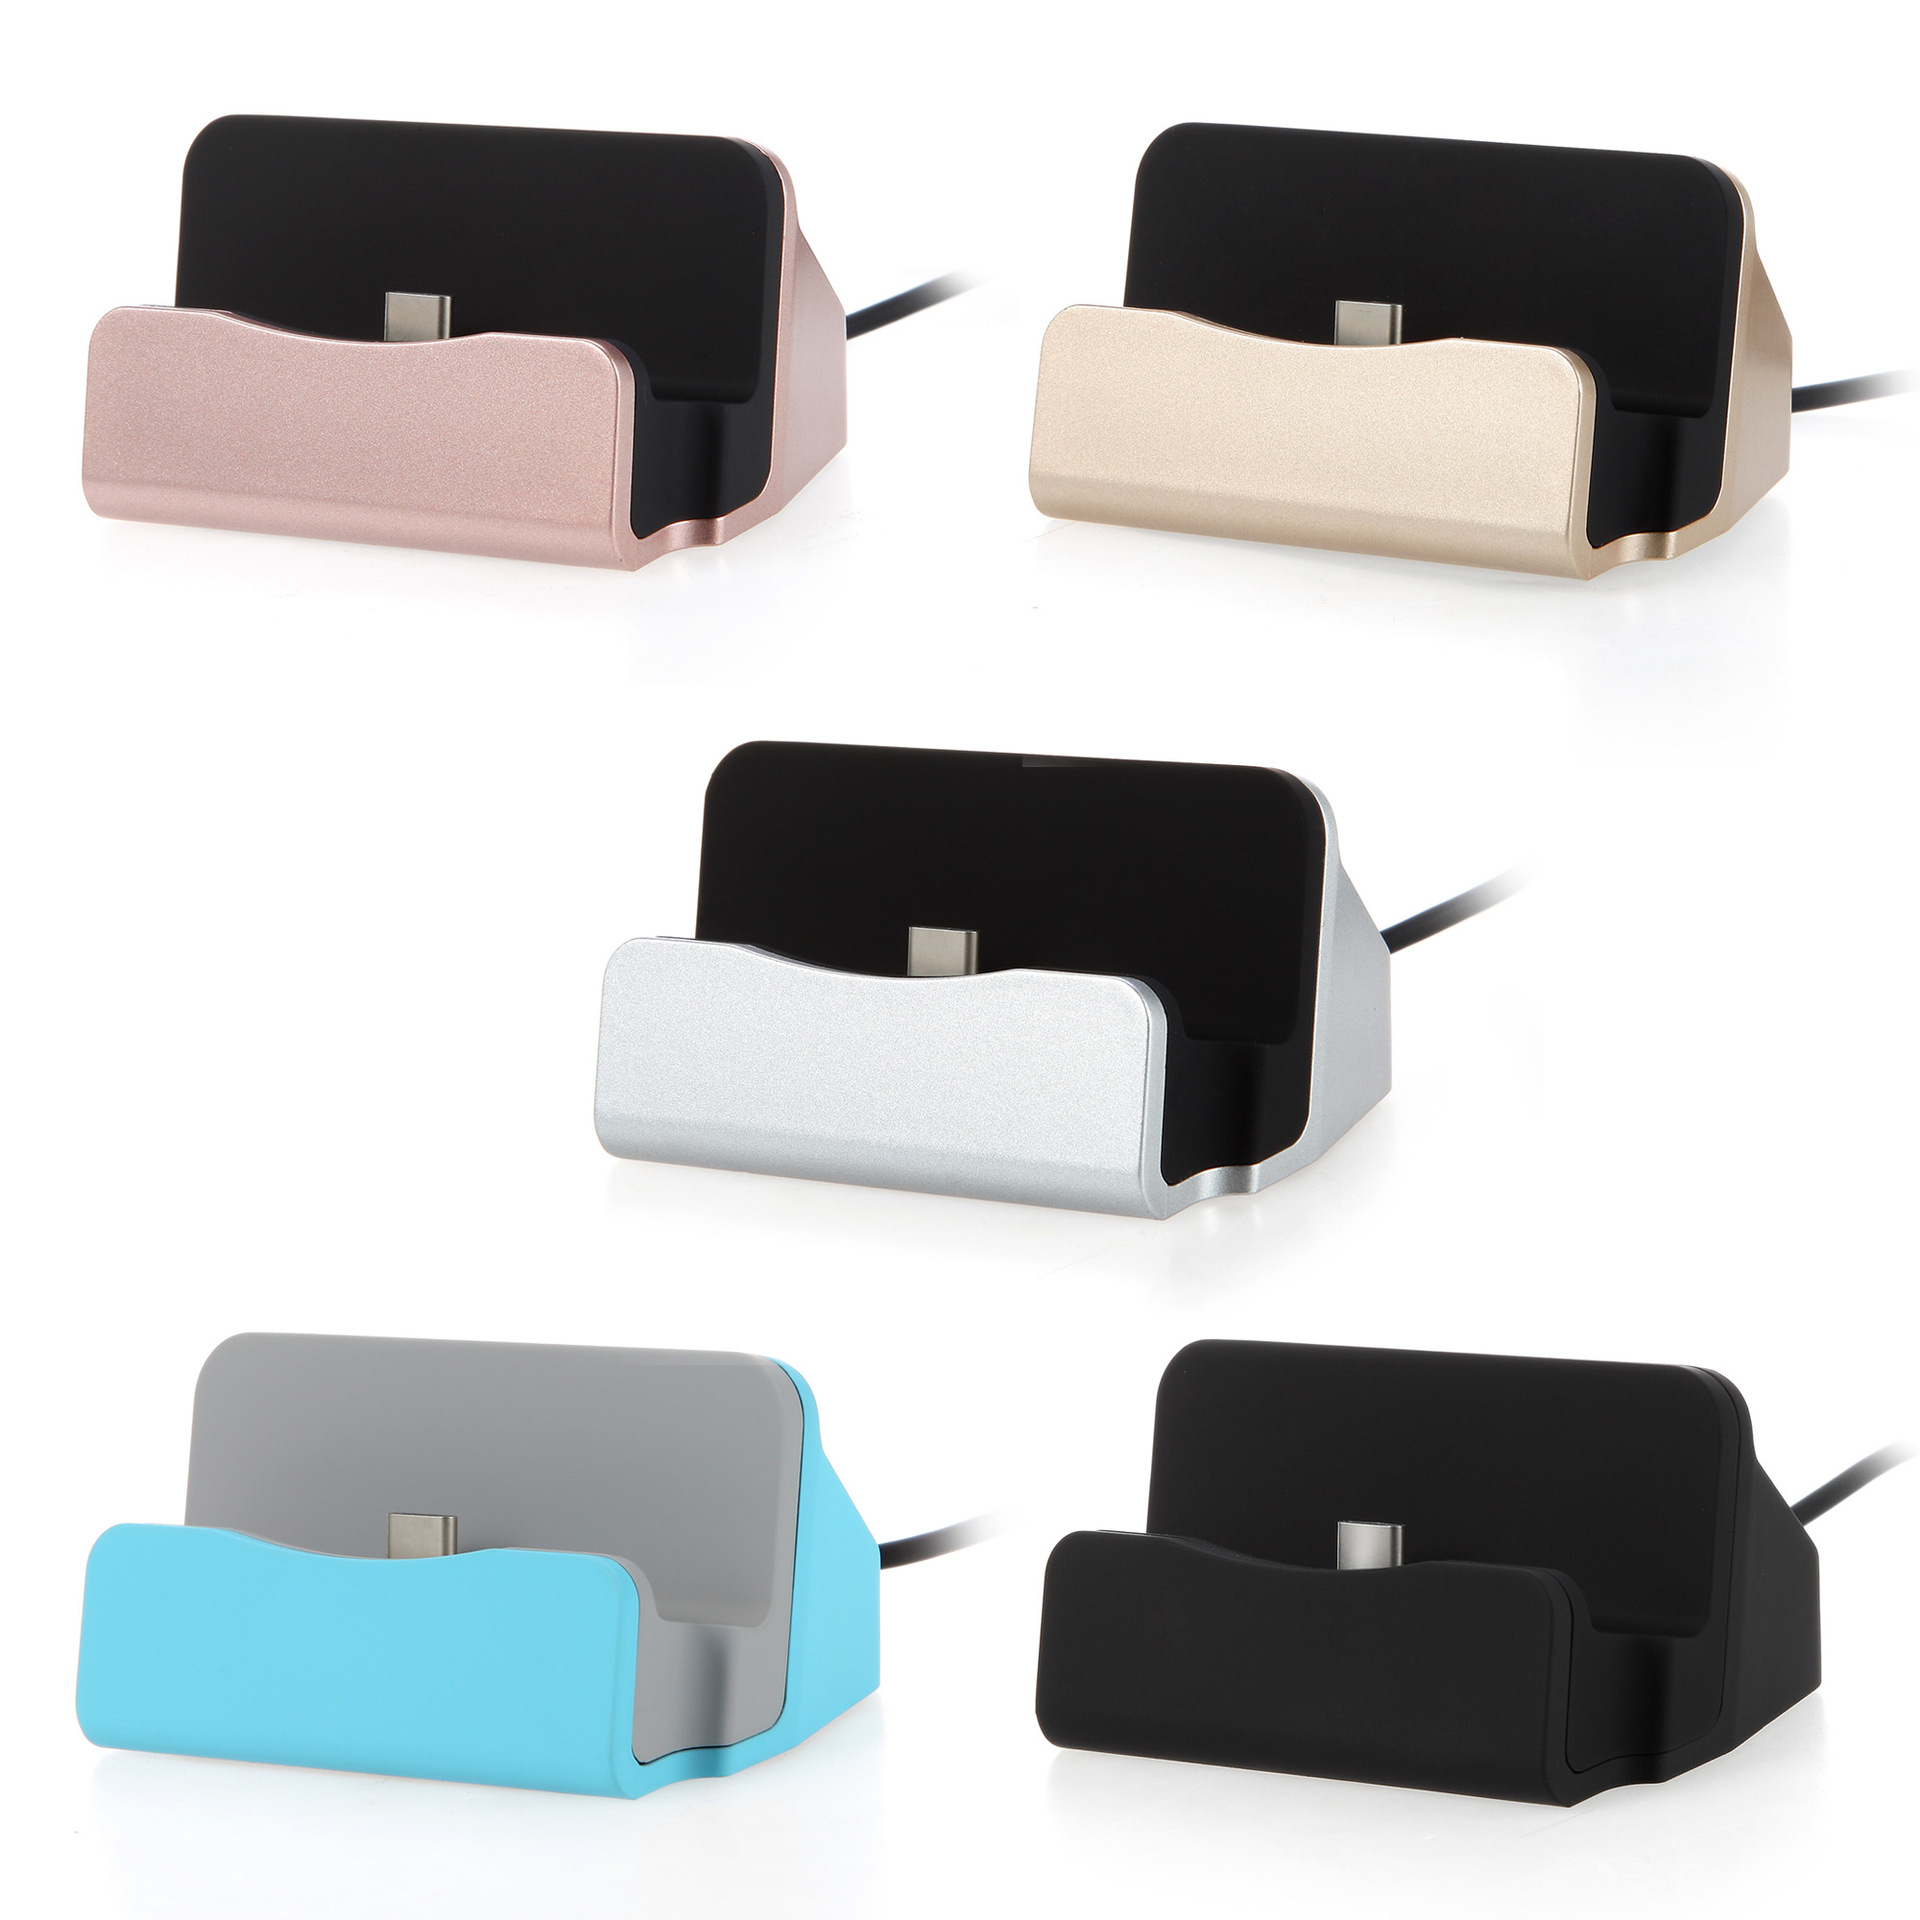 stand holder charging base dock station usb cable sync cradle charger base for xiaomi android type c samsung details 3